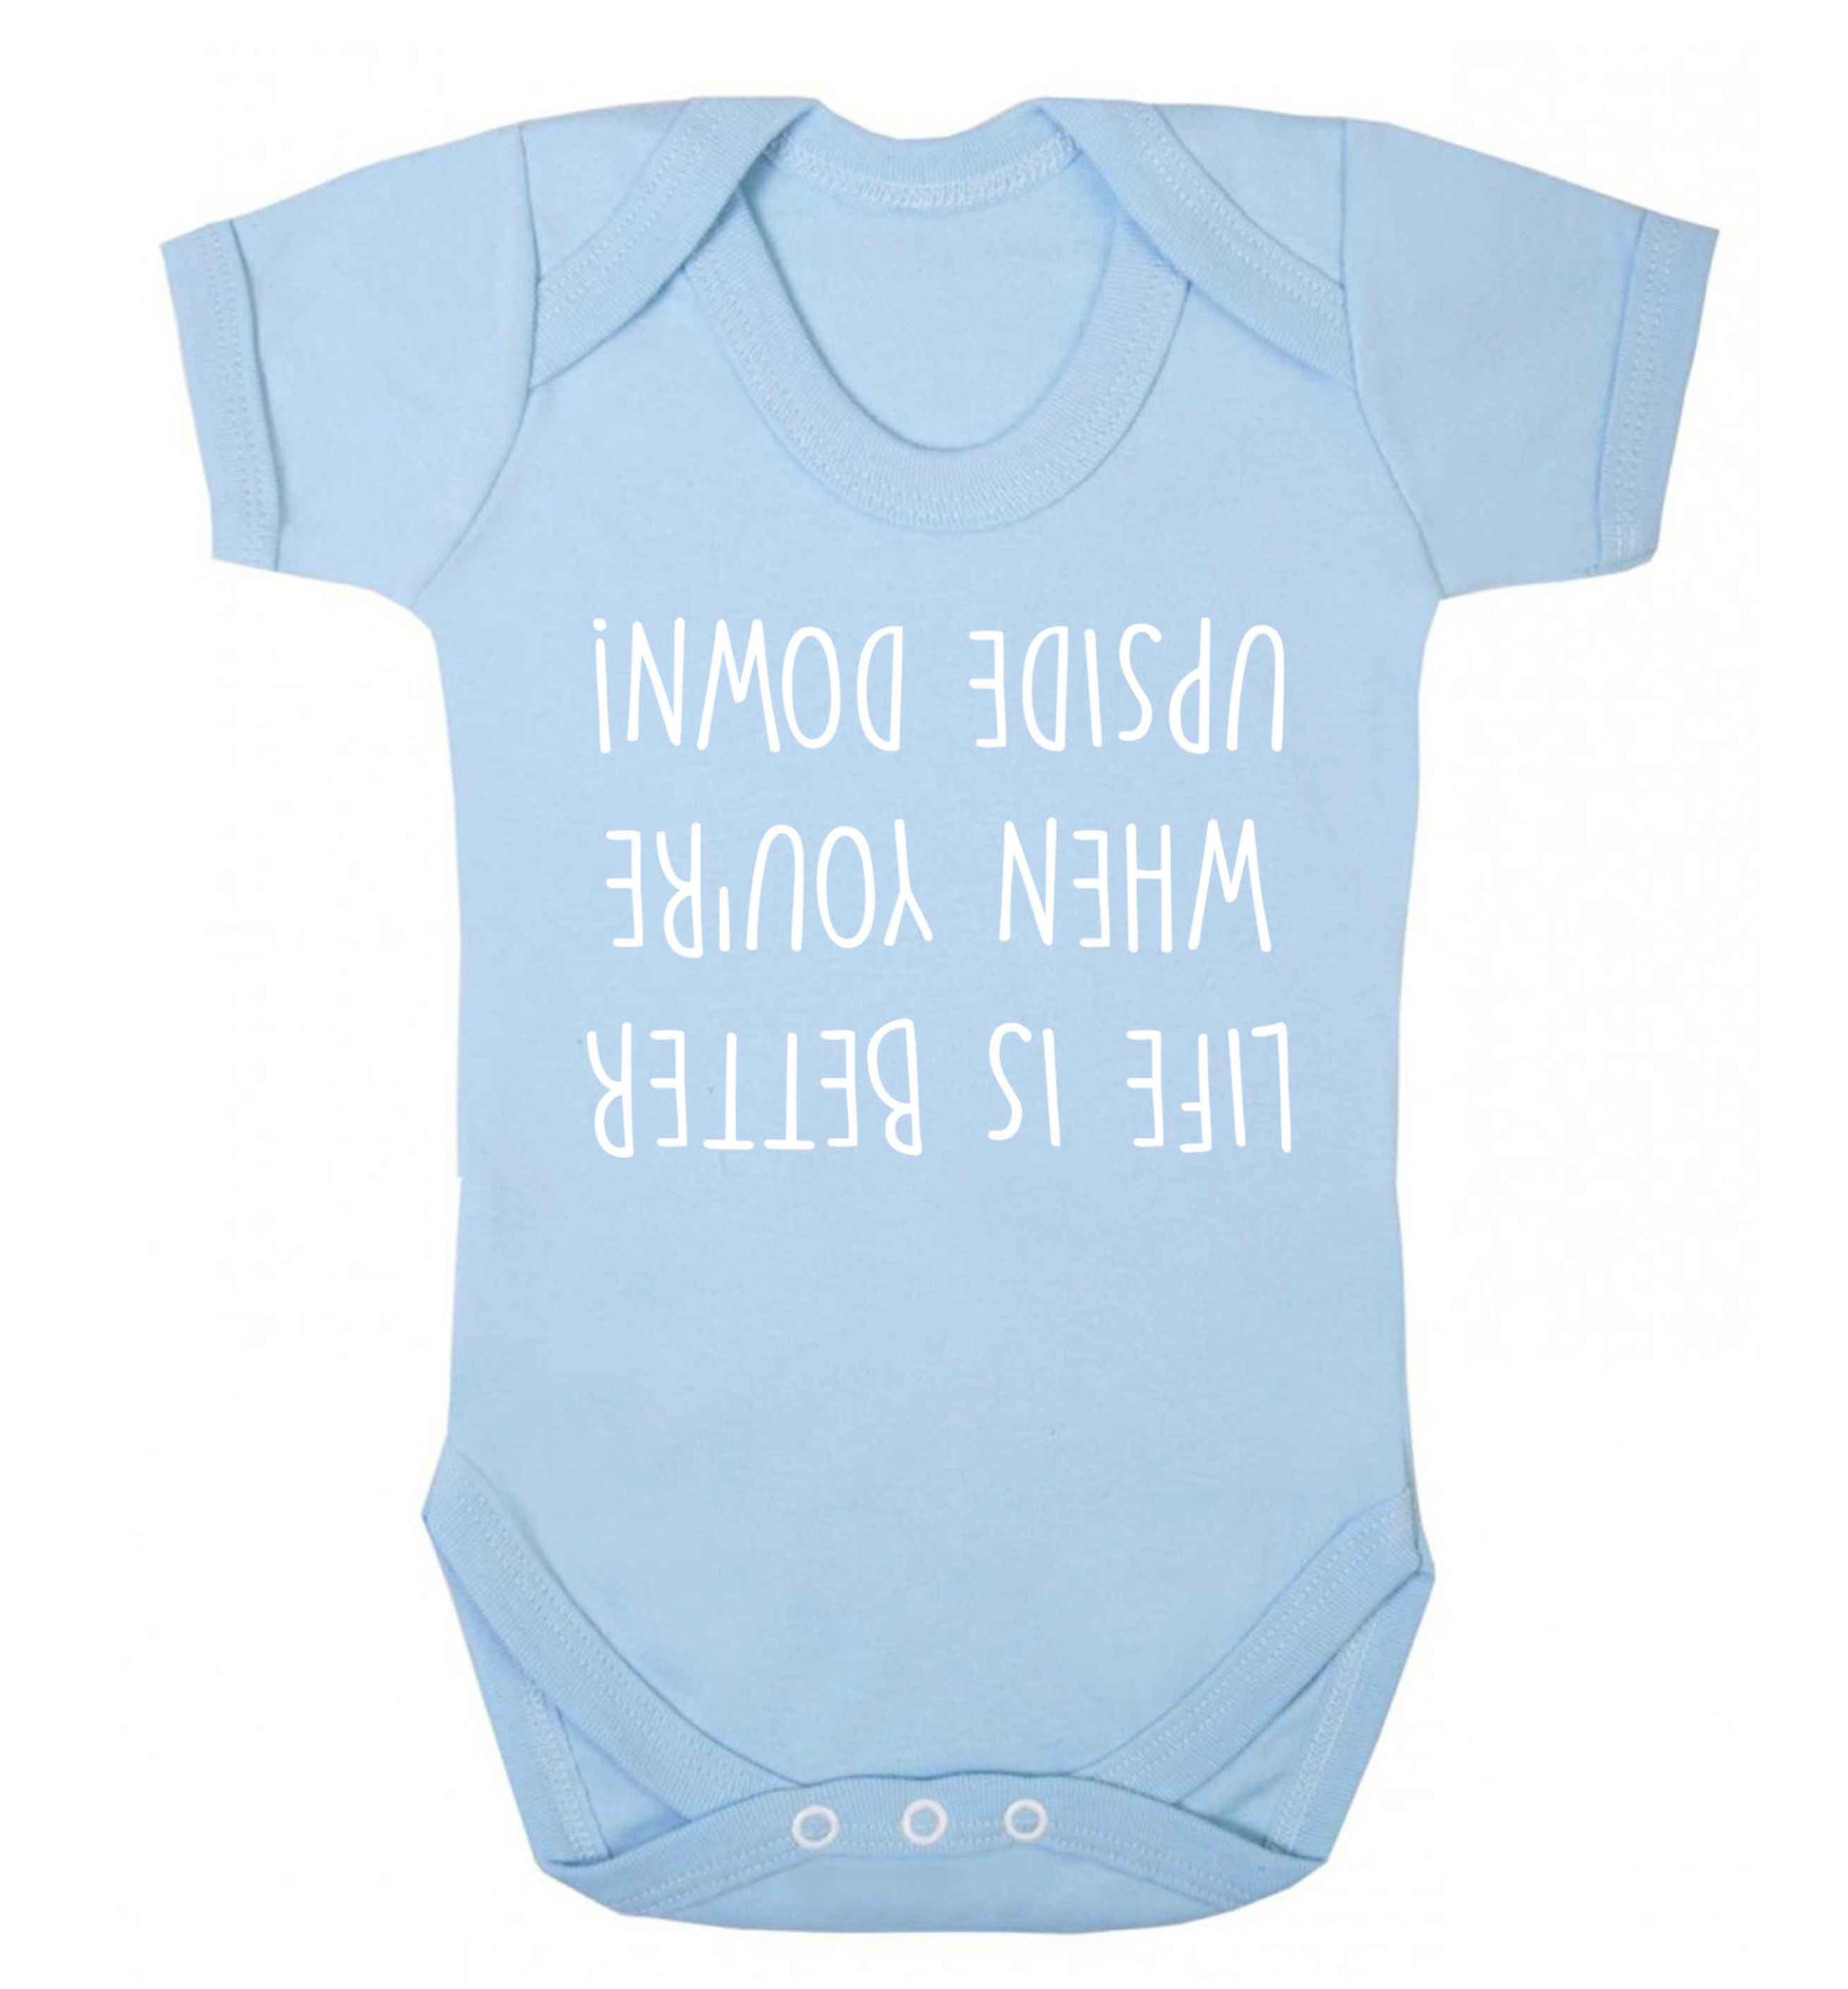 Life is better upside down Baby Vest pale blue 18-24 months